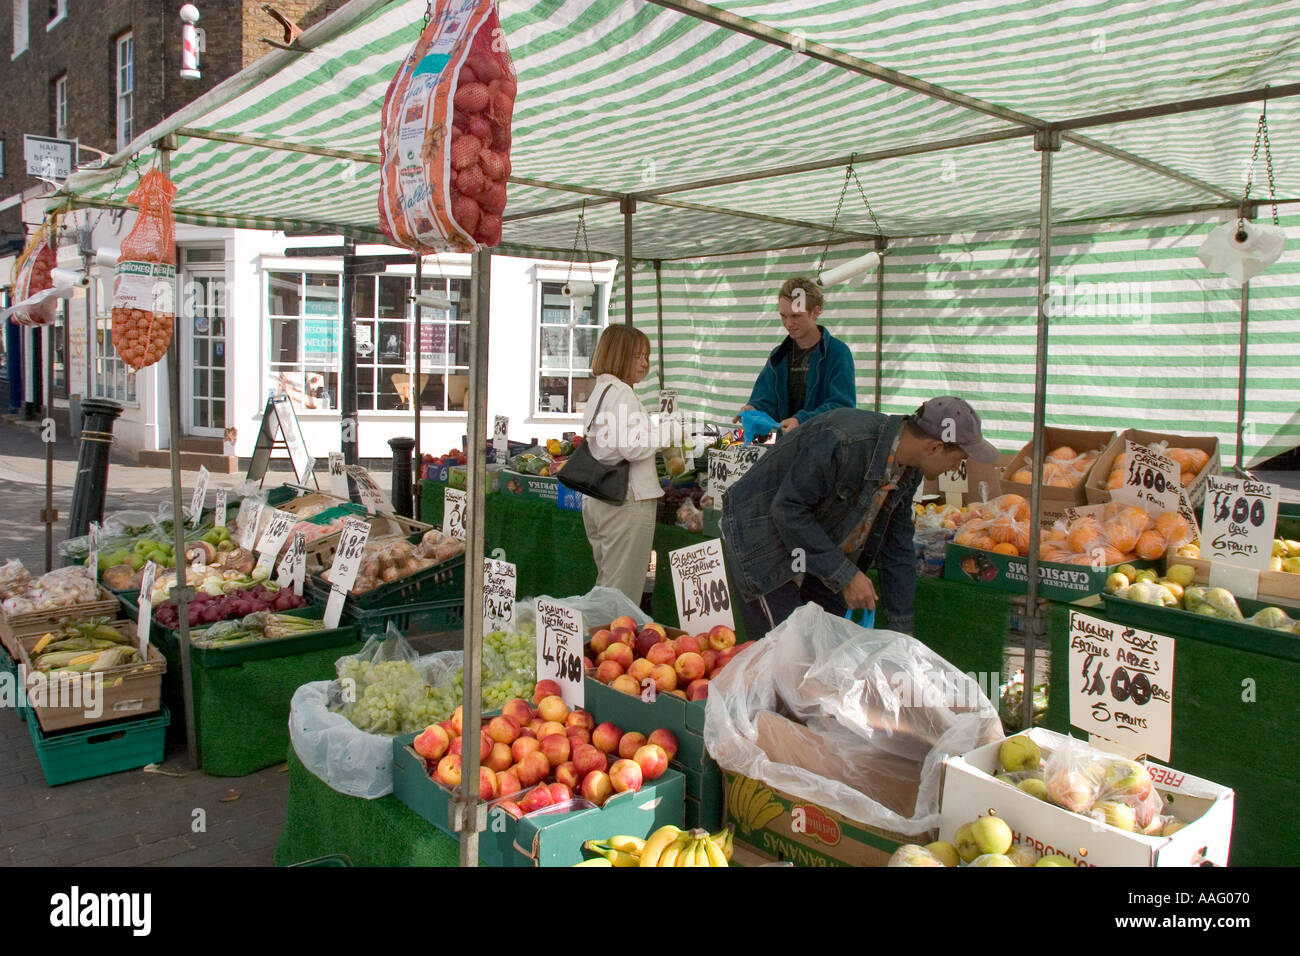 Shoppers at Market stall in town centre Hertford Hertfordshire GB UK Stock Photo